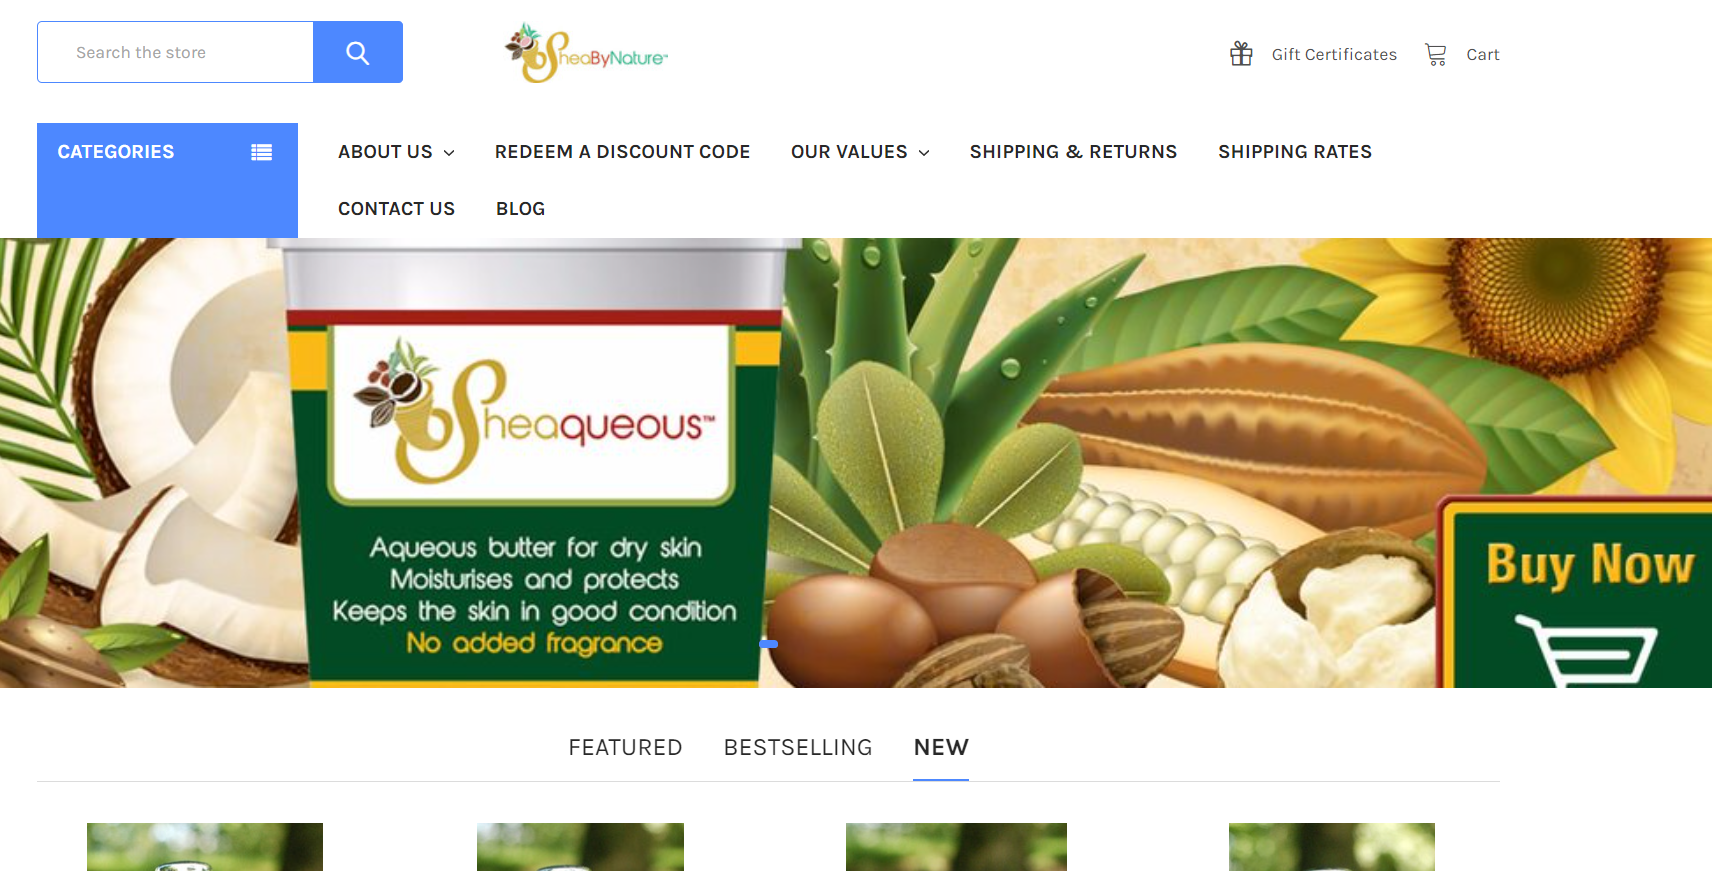 SheaByNature is a well-known dropshipping supplier that not only manufactures products but also provides dropshipping services to online businesses selling cosmetics. They offer over 34 natural skincare items, including body butter and DIY soap-making kits.